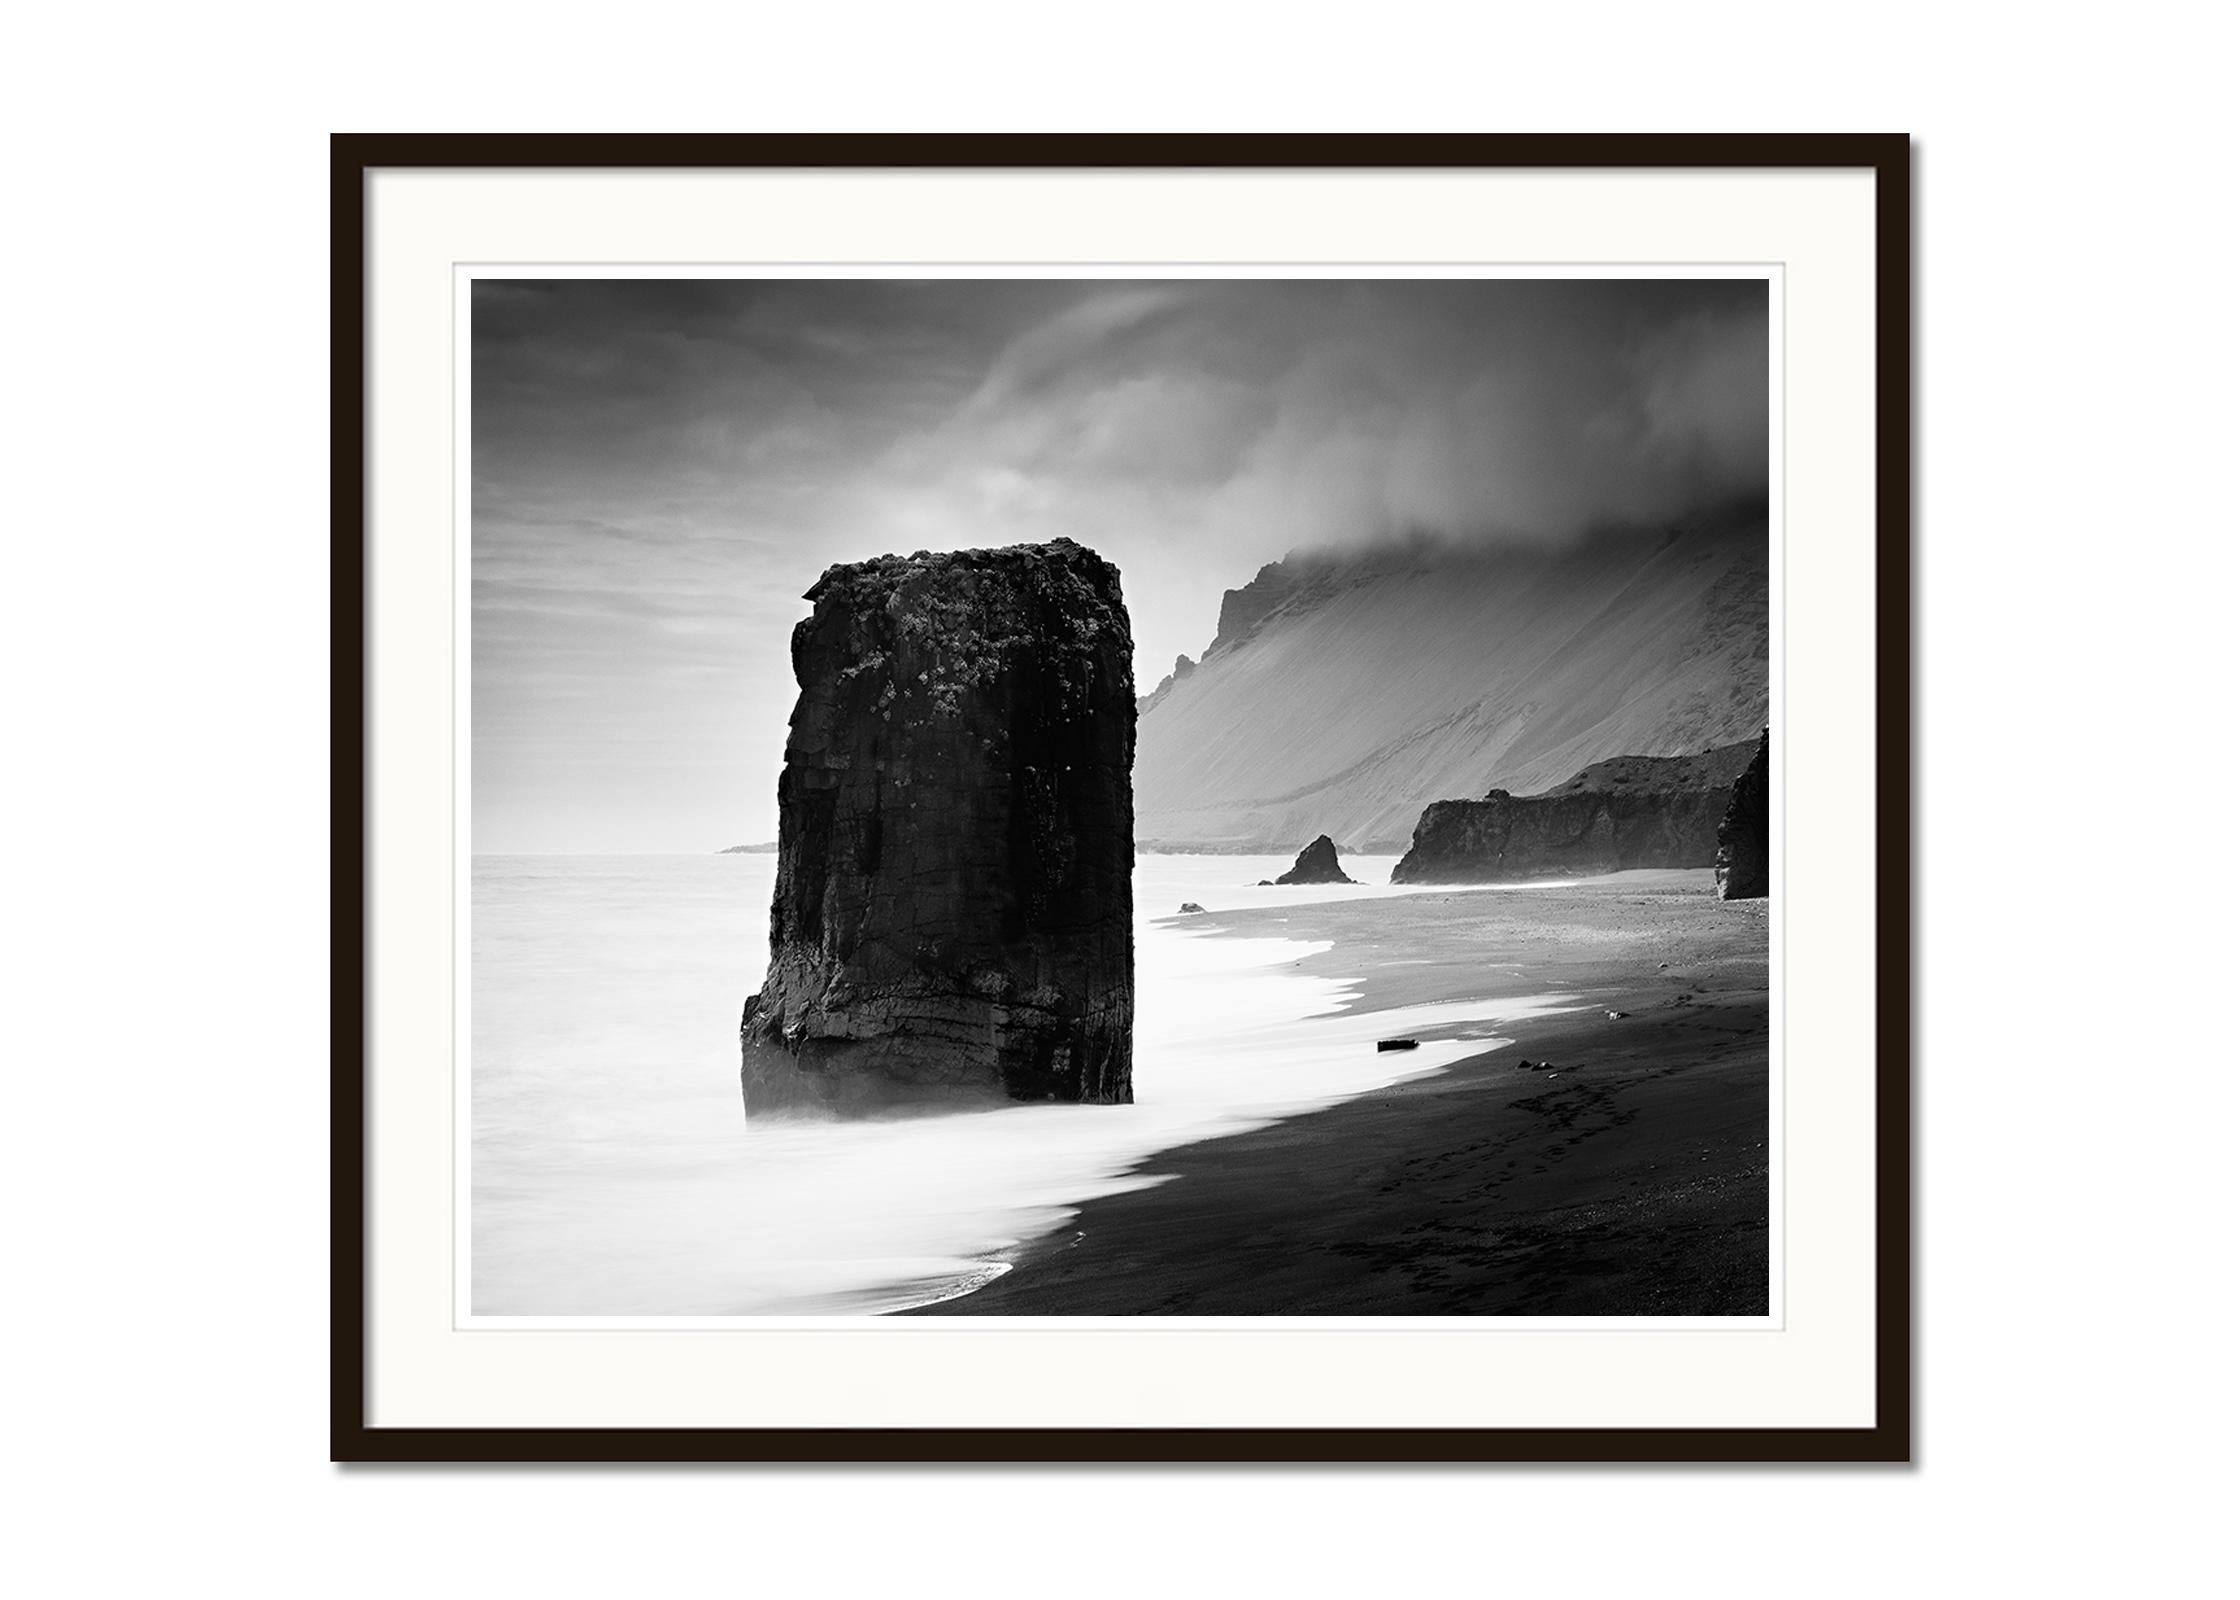 Flooded Rock, Black Beach, Iceland, black and white photography, landscape, art - Contemporary Photograph by Gerald Berghammer